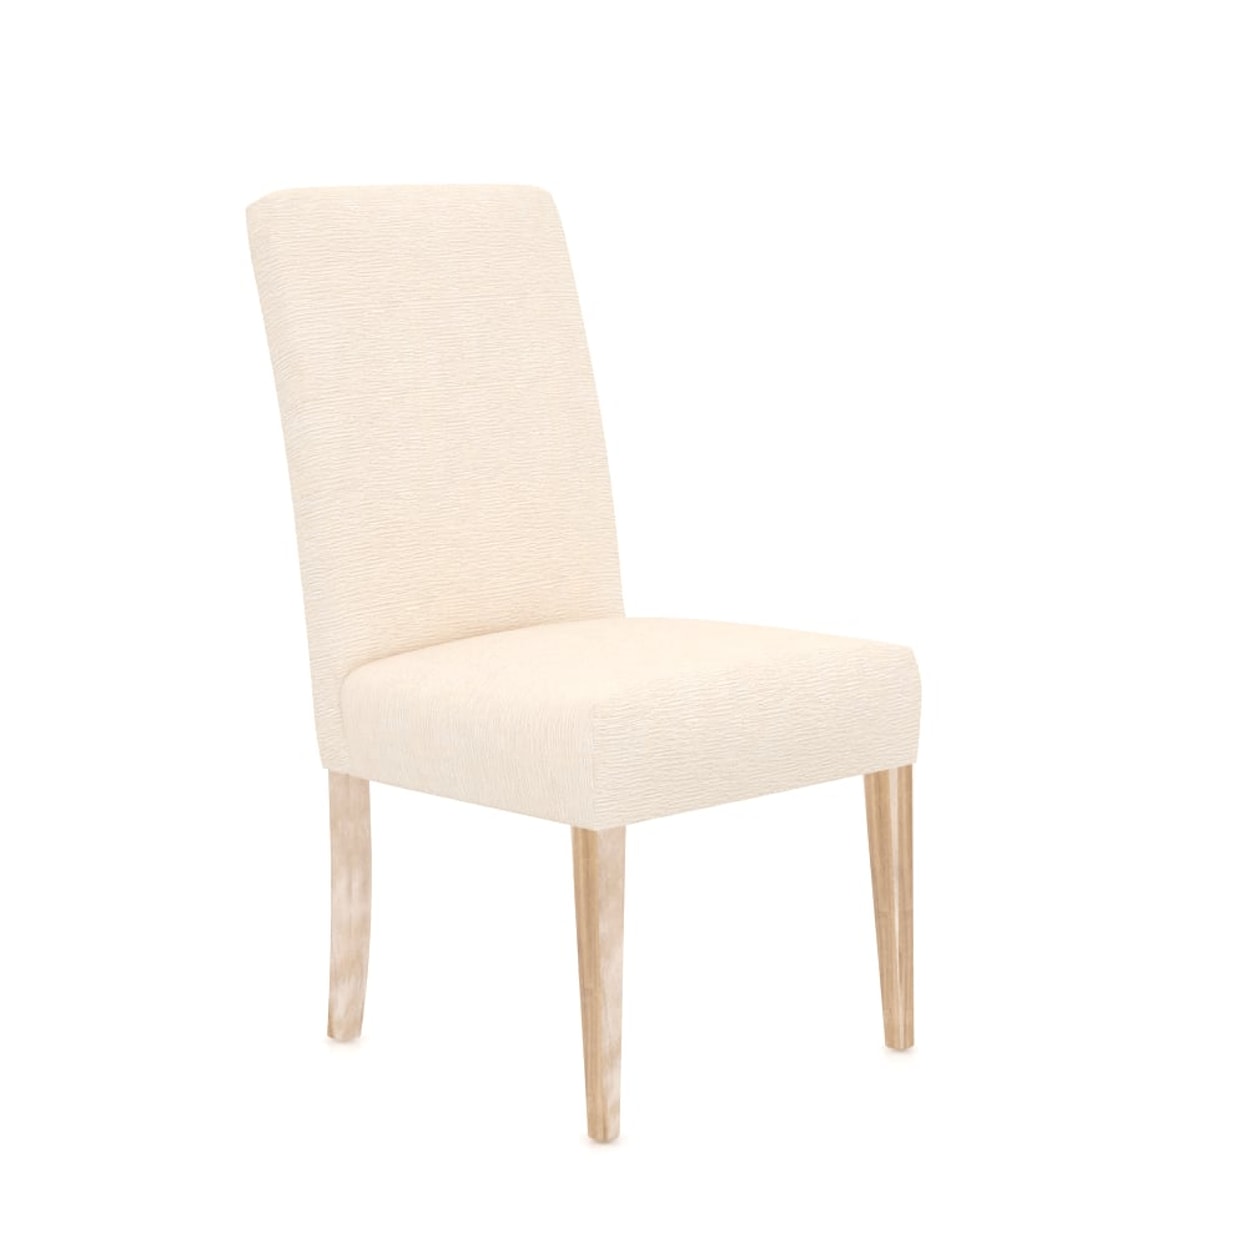 Canadel Loft - Custom Dining Customizable Upholstered Dining Chair